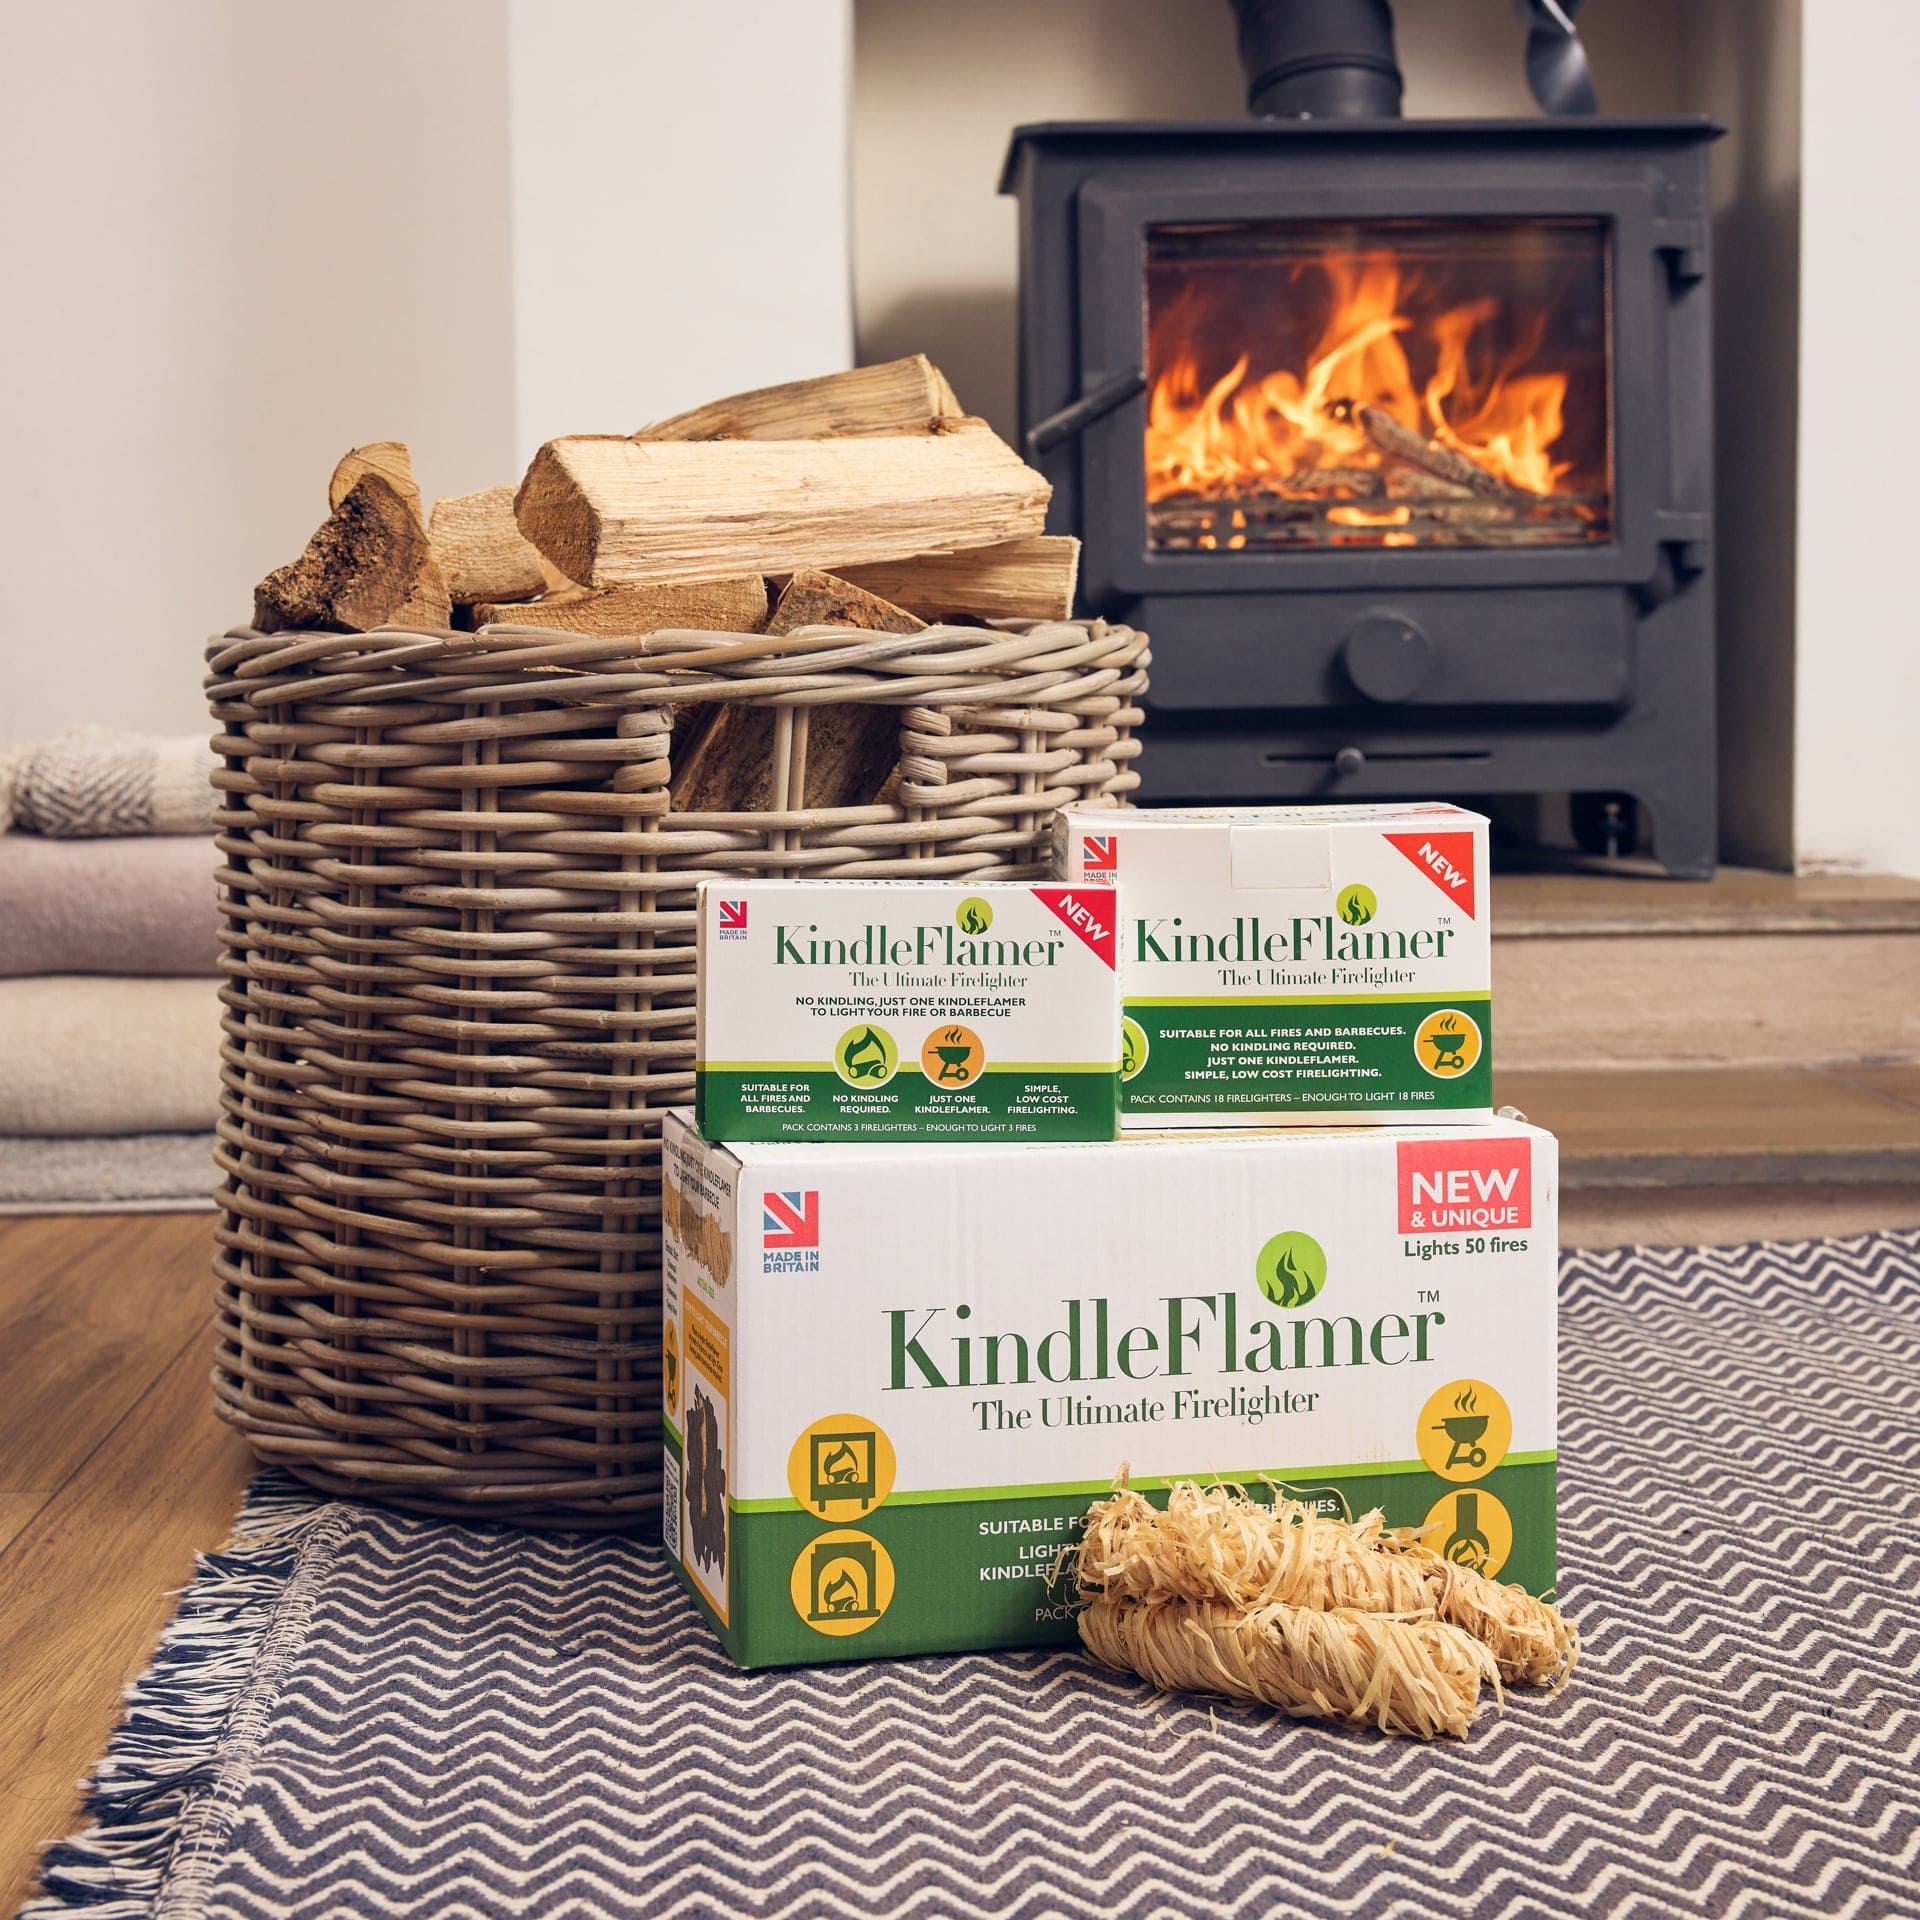 KindleFlamers natural firelighters, perfect for lighting fires in woodburning stoves